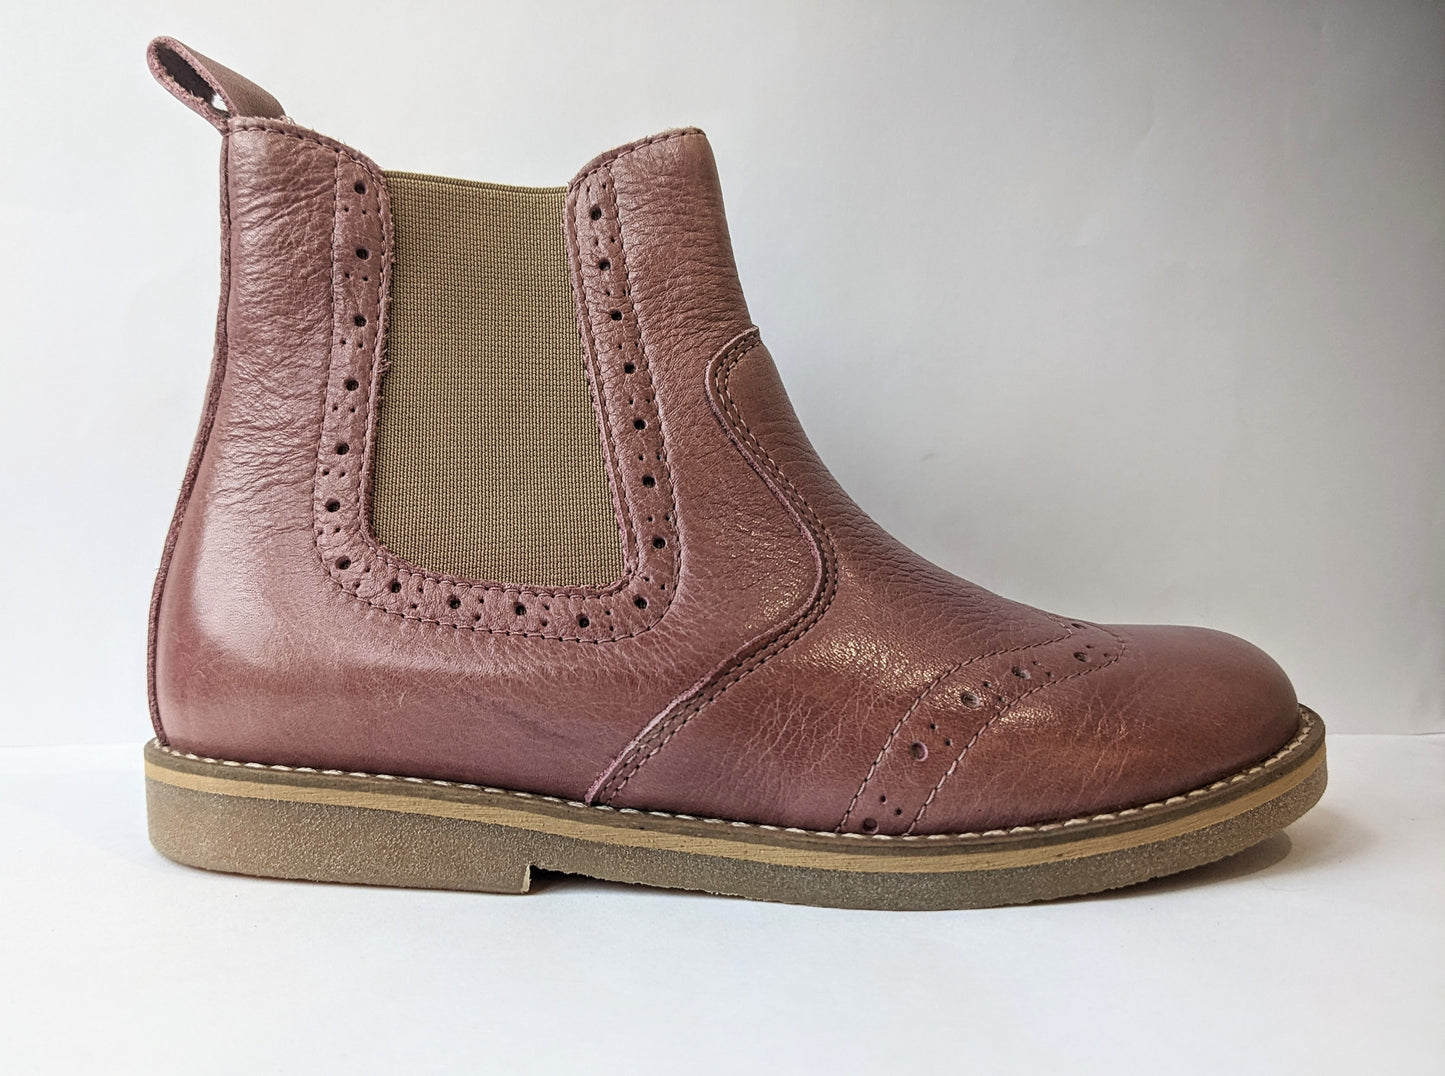 A girls ankle boot by Froddo, style Chelys Brogue G3160080-10,in pink leather with zip fastening. Right side view.